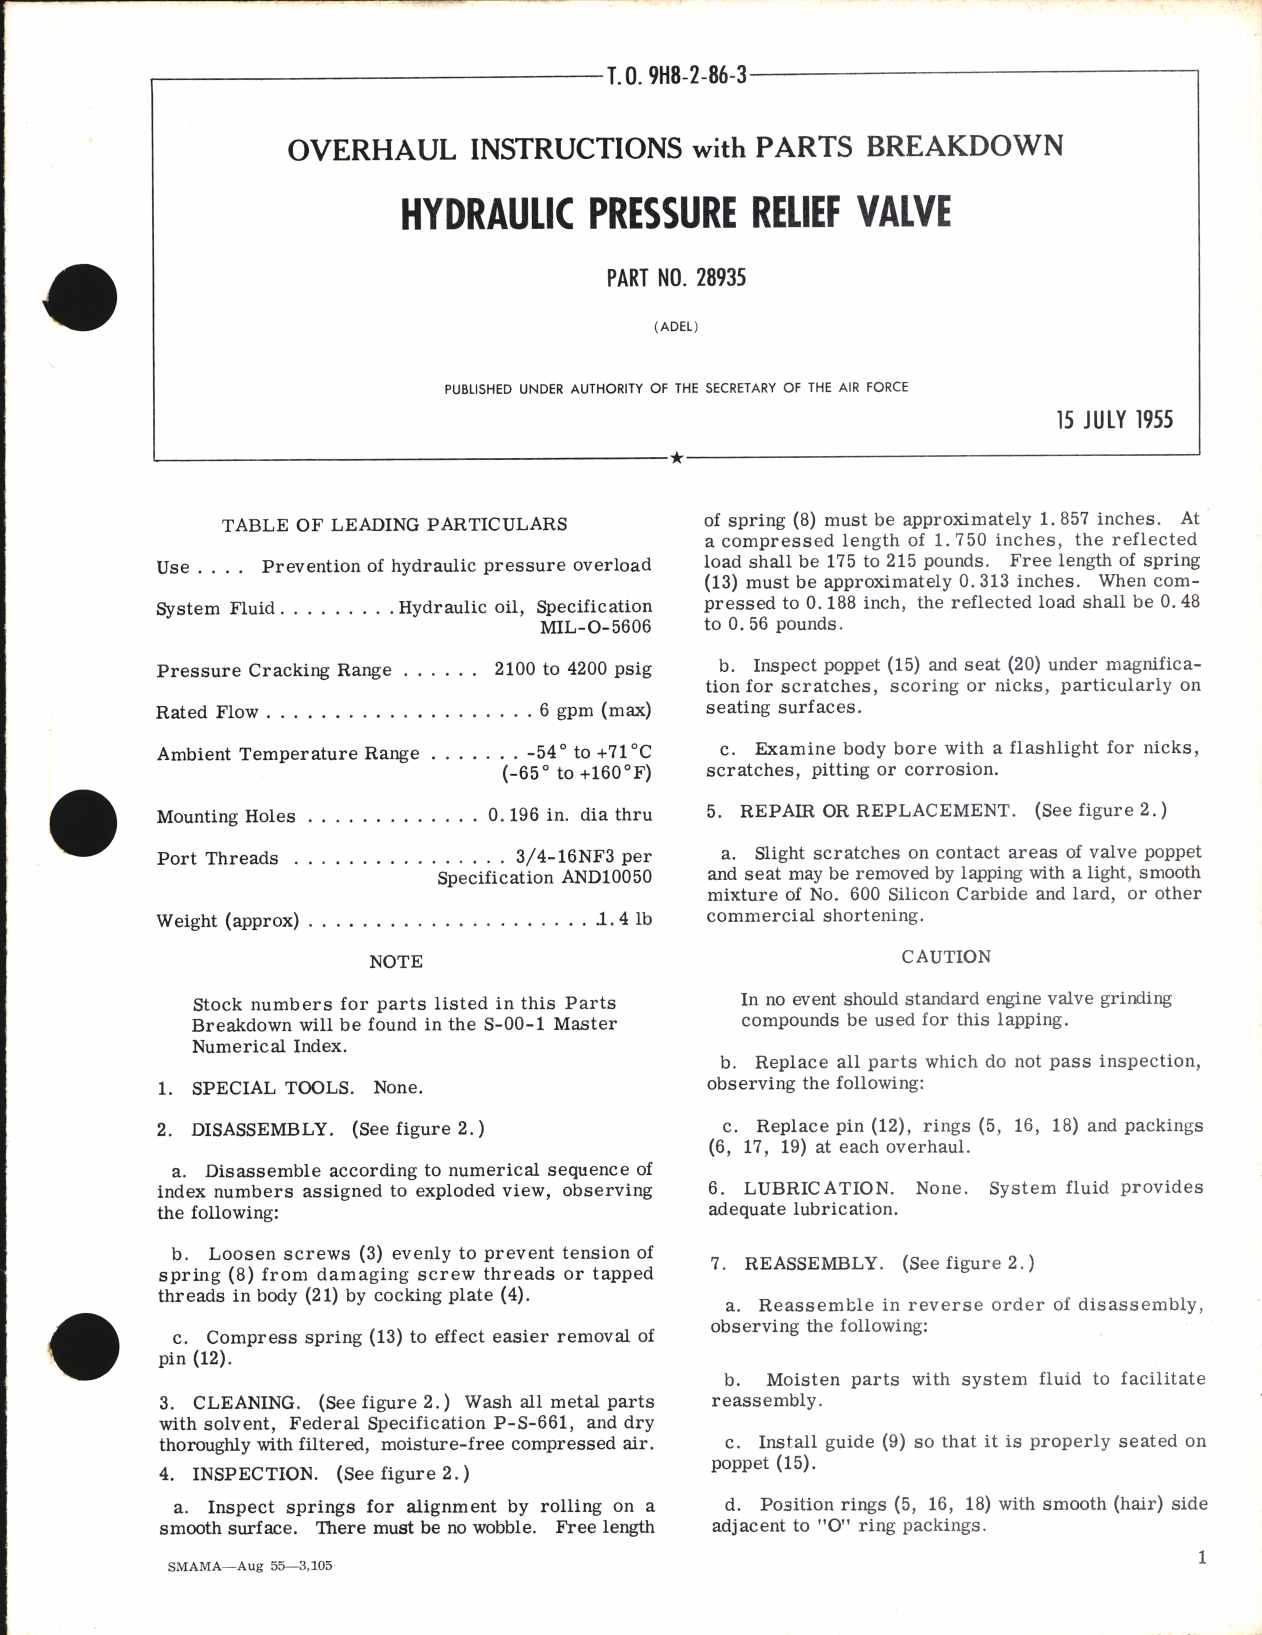 Sample page 1 from AirCorps Library document: Overhaul Instructions with Parts Breakdown for Hydraulic Pressure Relief Valve Part No. 28935